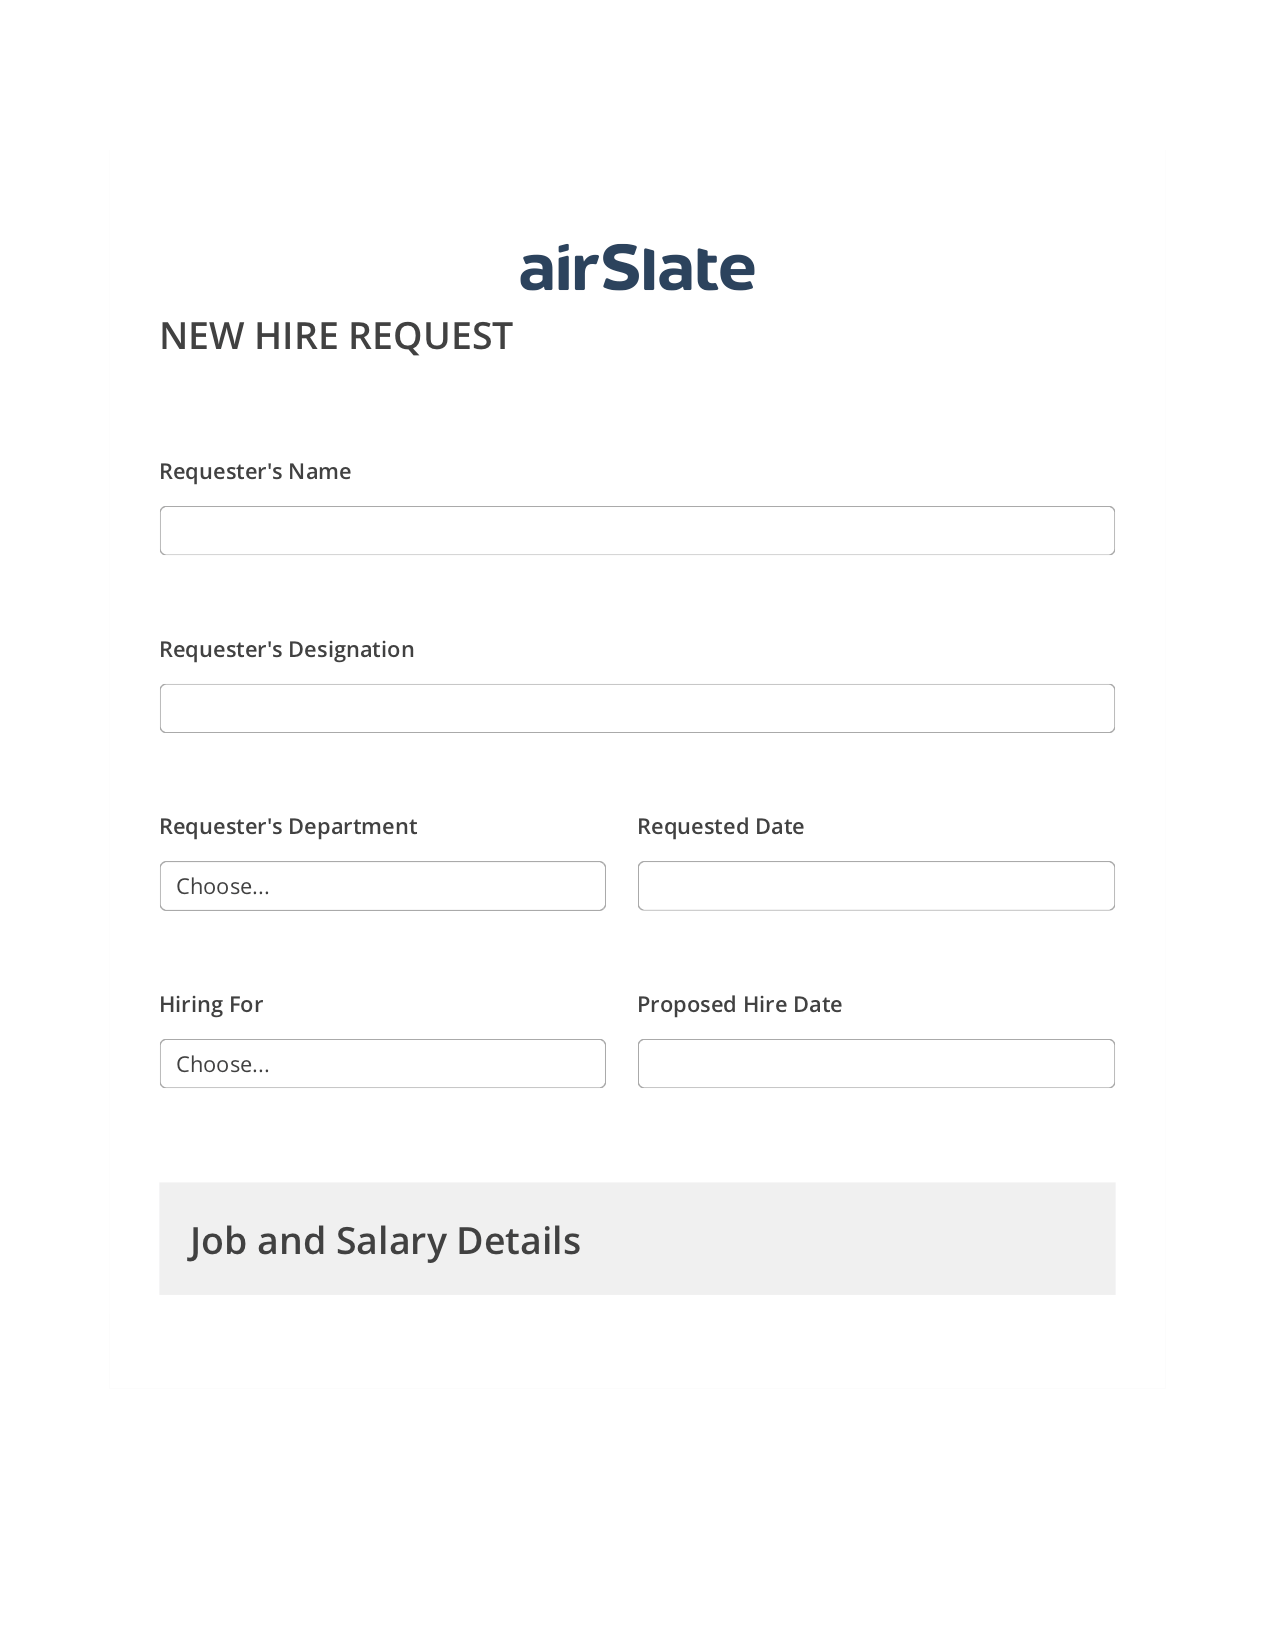 Multirole Hiring Request Workflow Prefill from NetSuite records, Remove Slate Bot, Export to NetSuite Bot